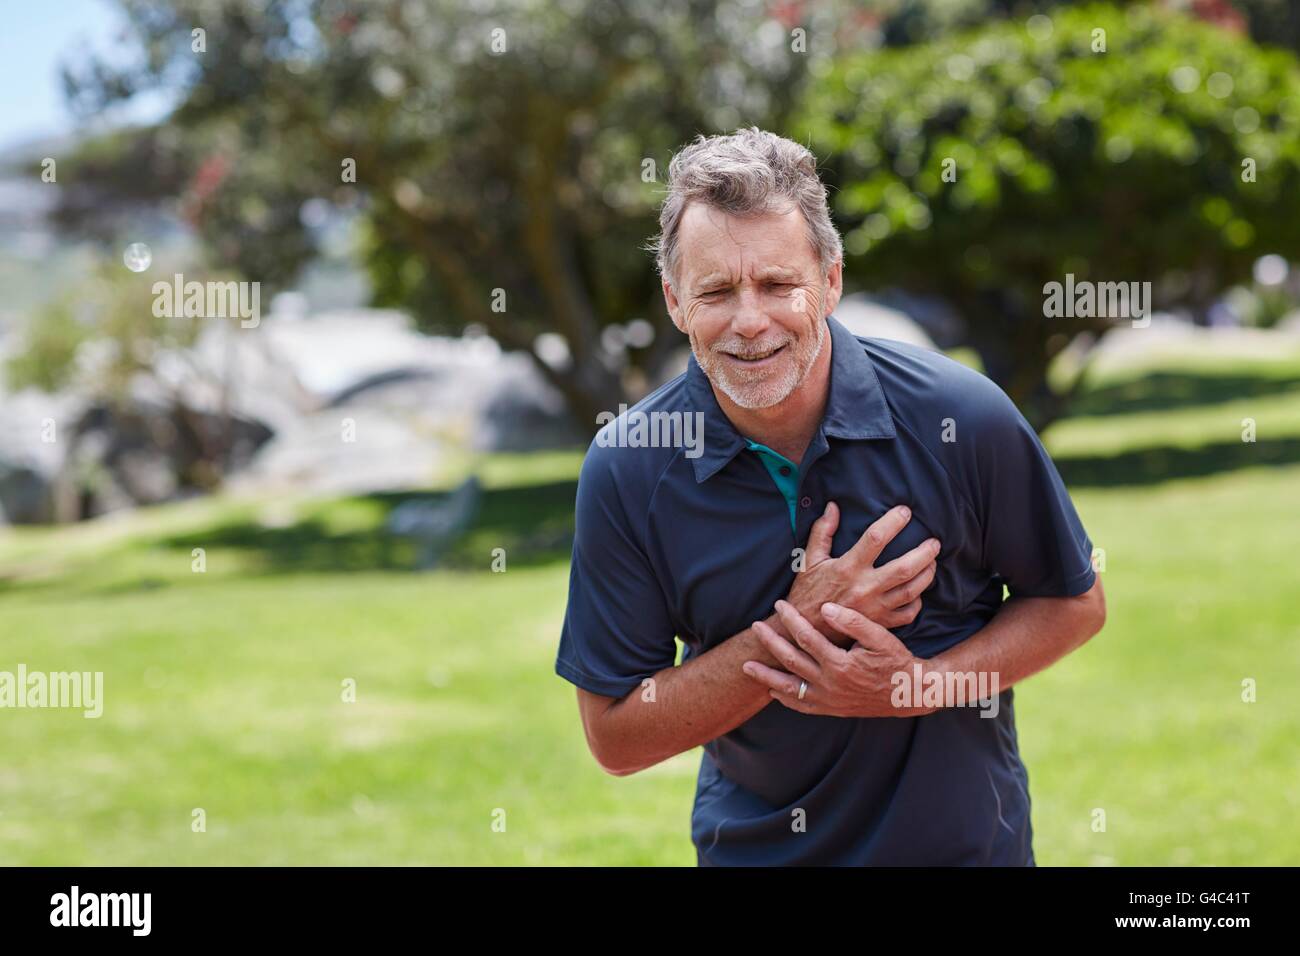 MODEL RELEASED. Senior man holding his chest in pain. Stock Photo